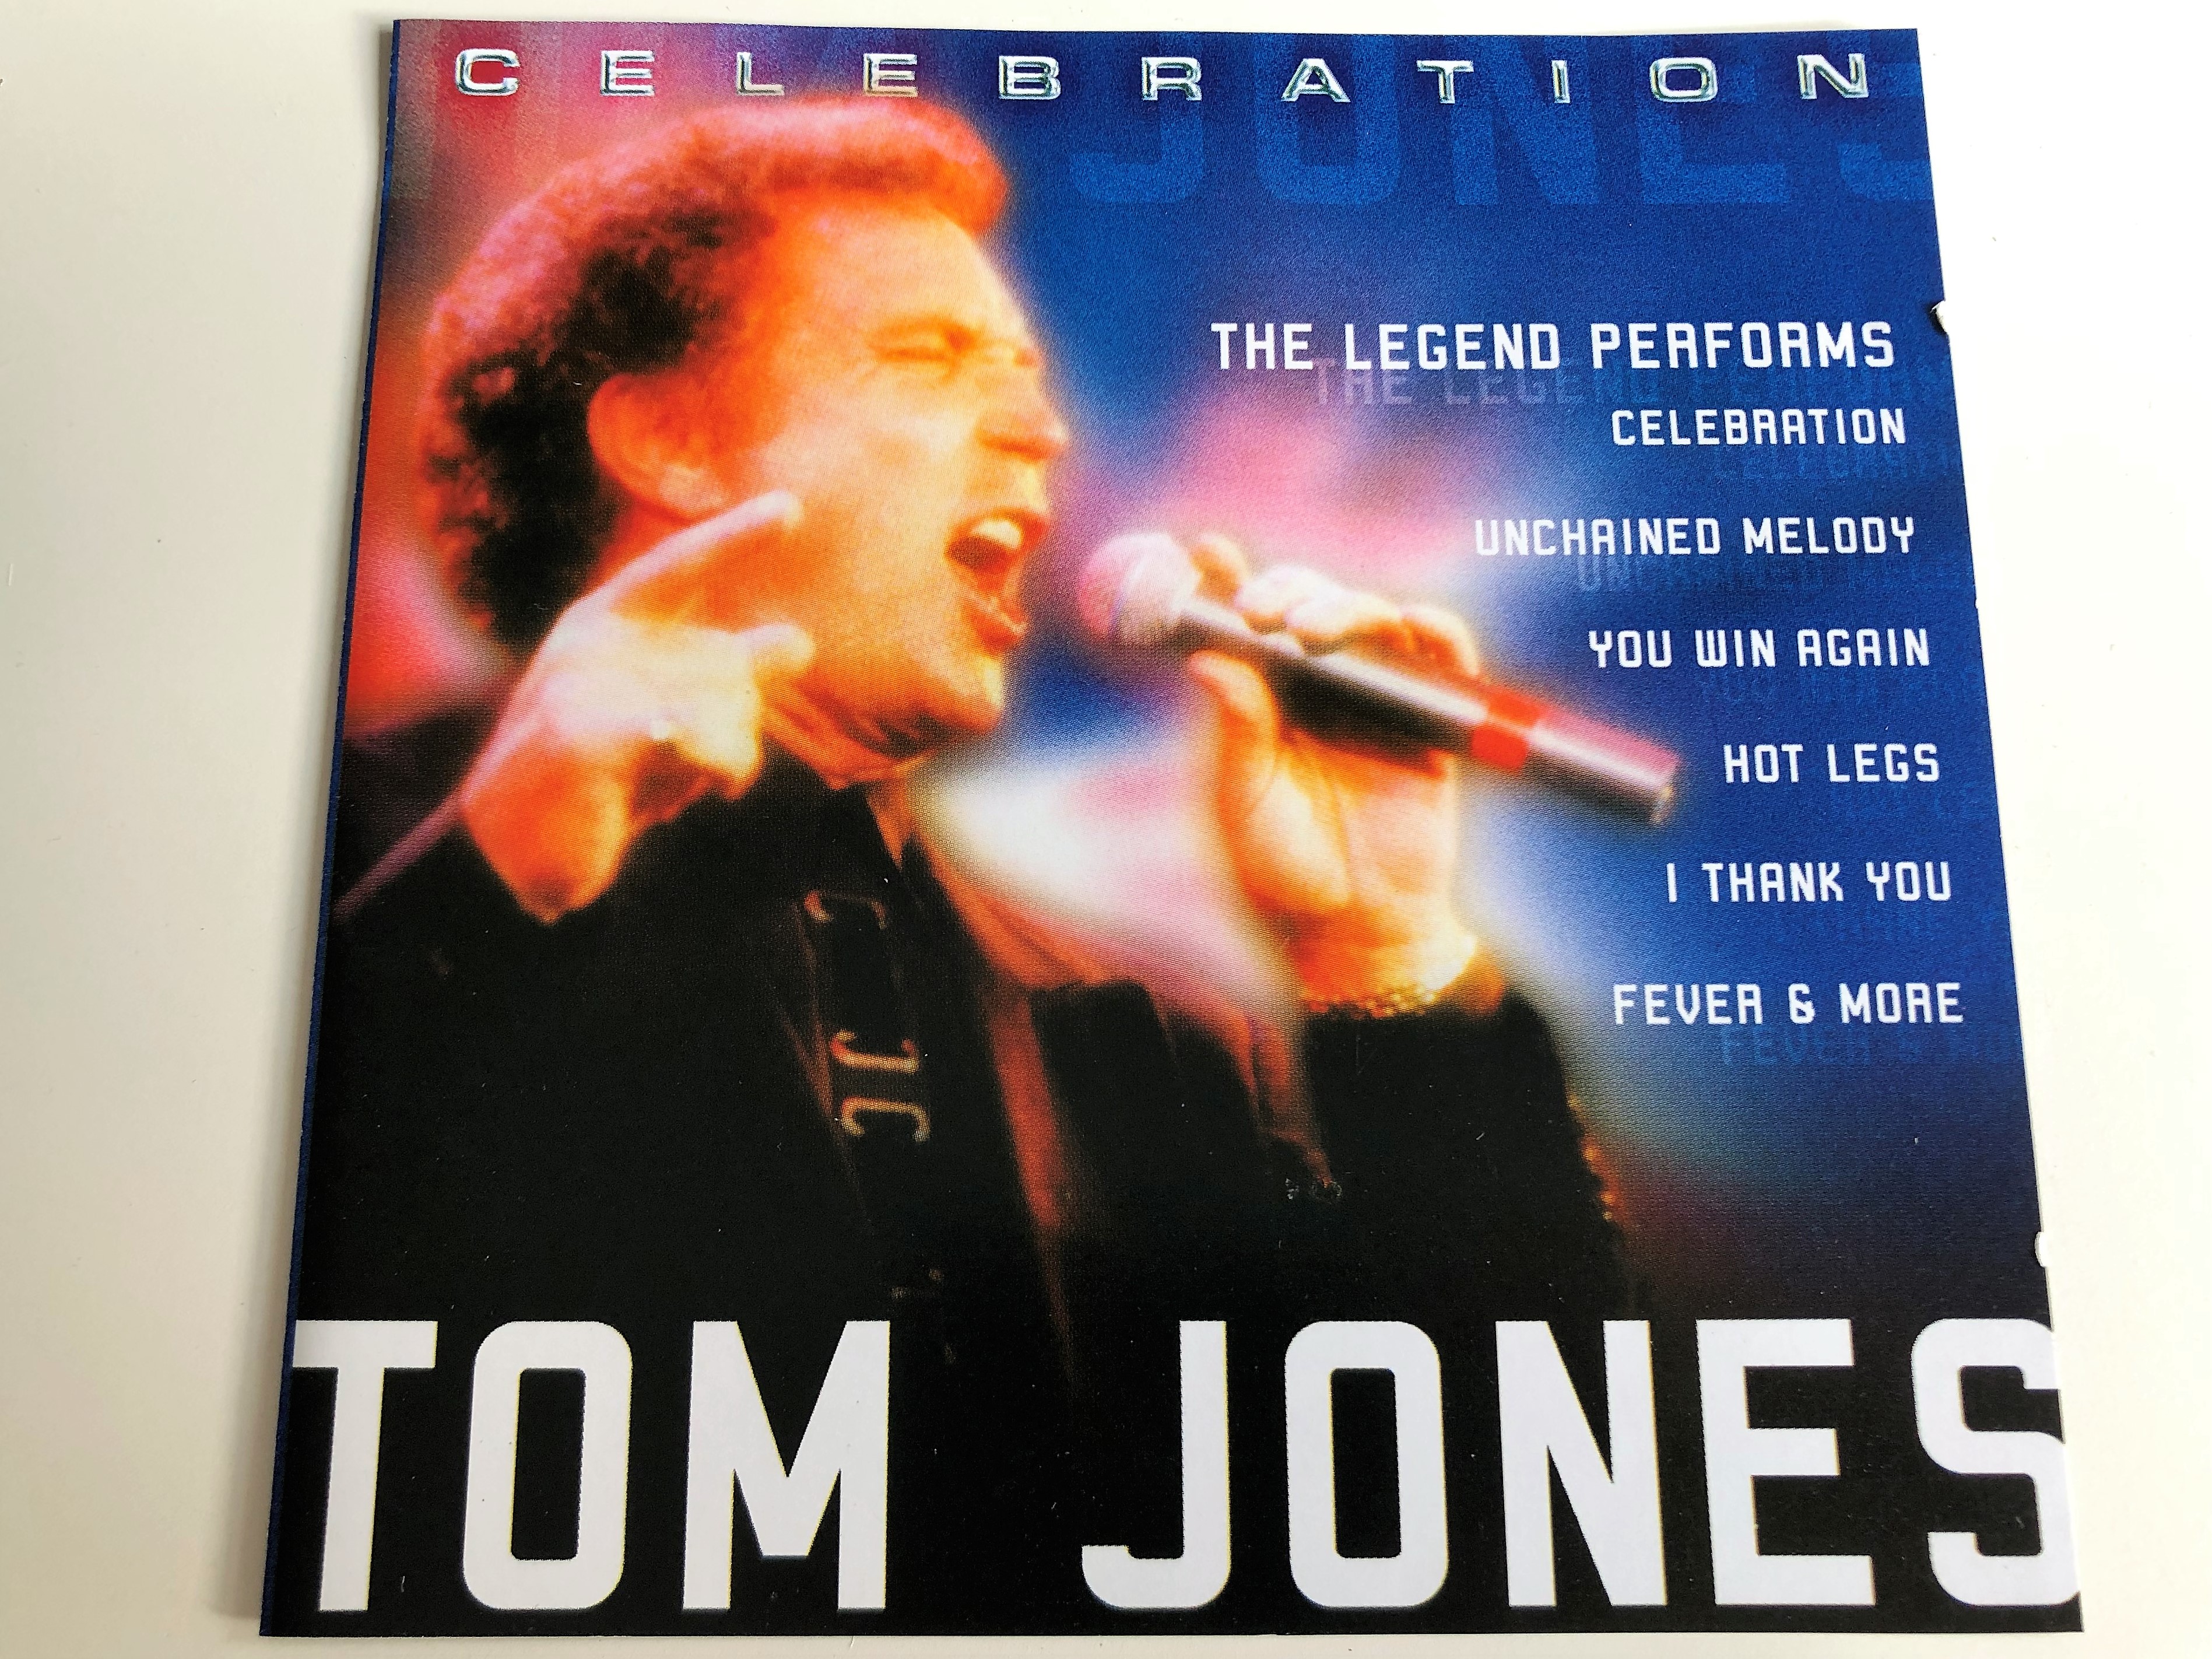 tom-jones-the-legend-performs-celebration-unchained-melody-you-win-again-hot-legs-i-thank-you-fever-more-audio-cd-gfs-470-cedar-1-.jpg